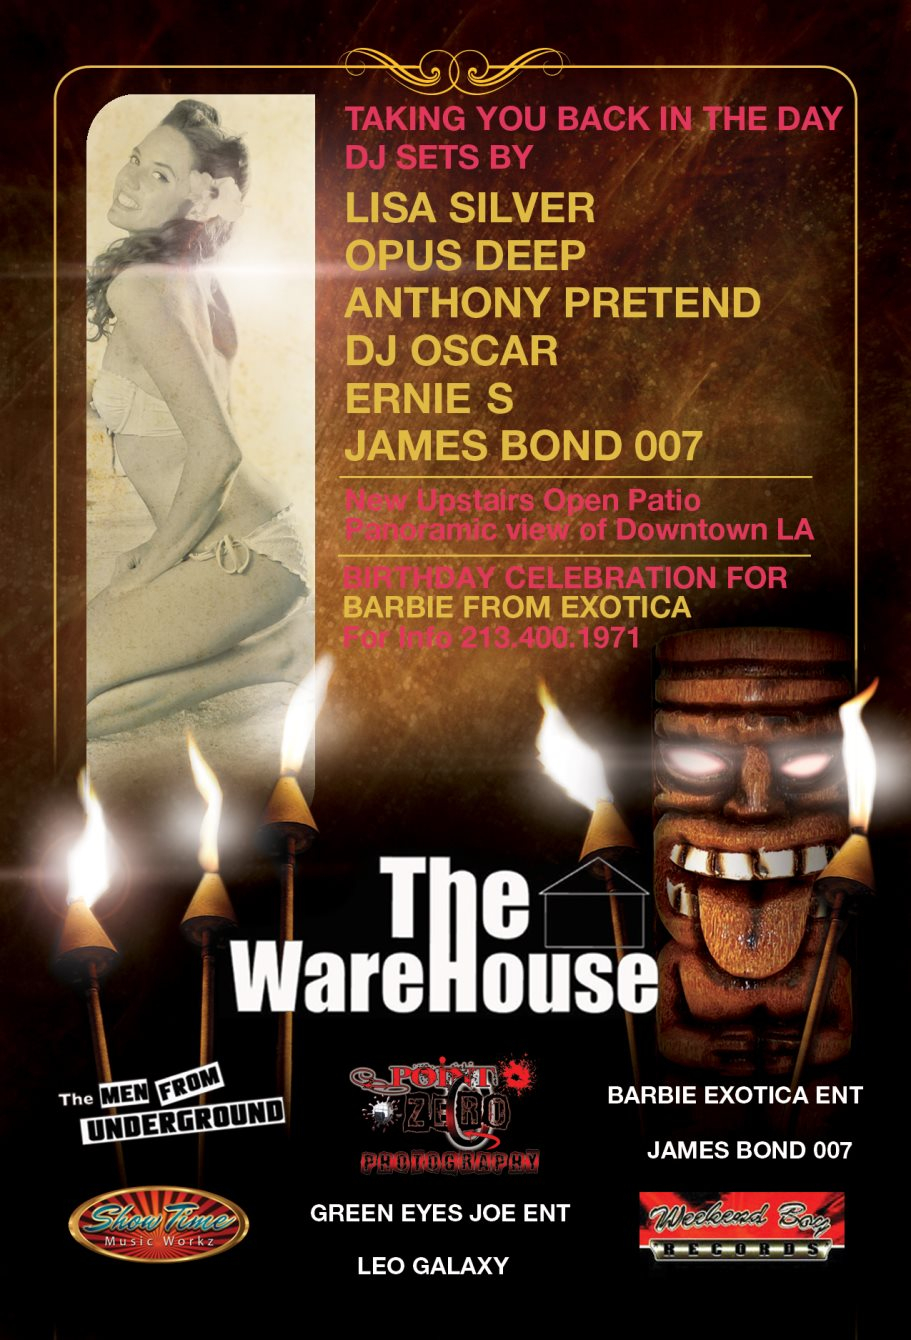 Luau In Leos 2022 Schedule The Warehouse Luau Party At 333 Live, Los Angeles